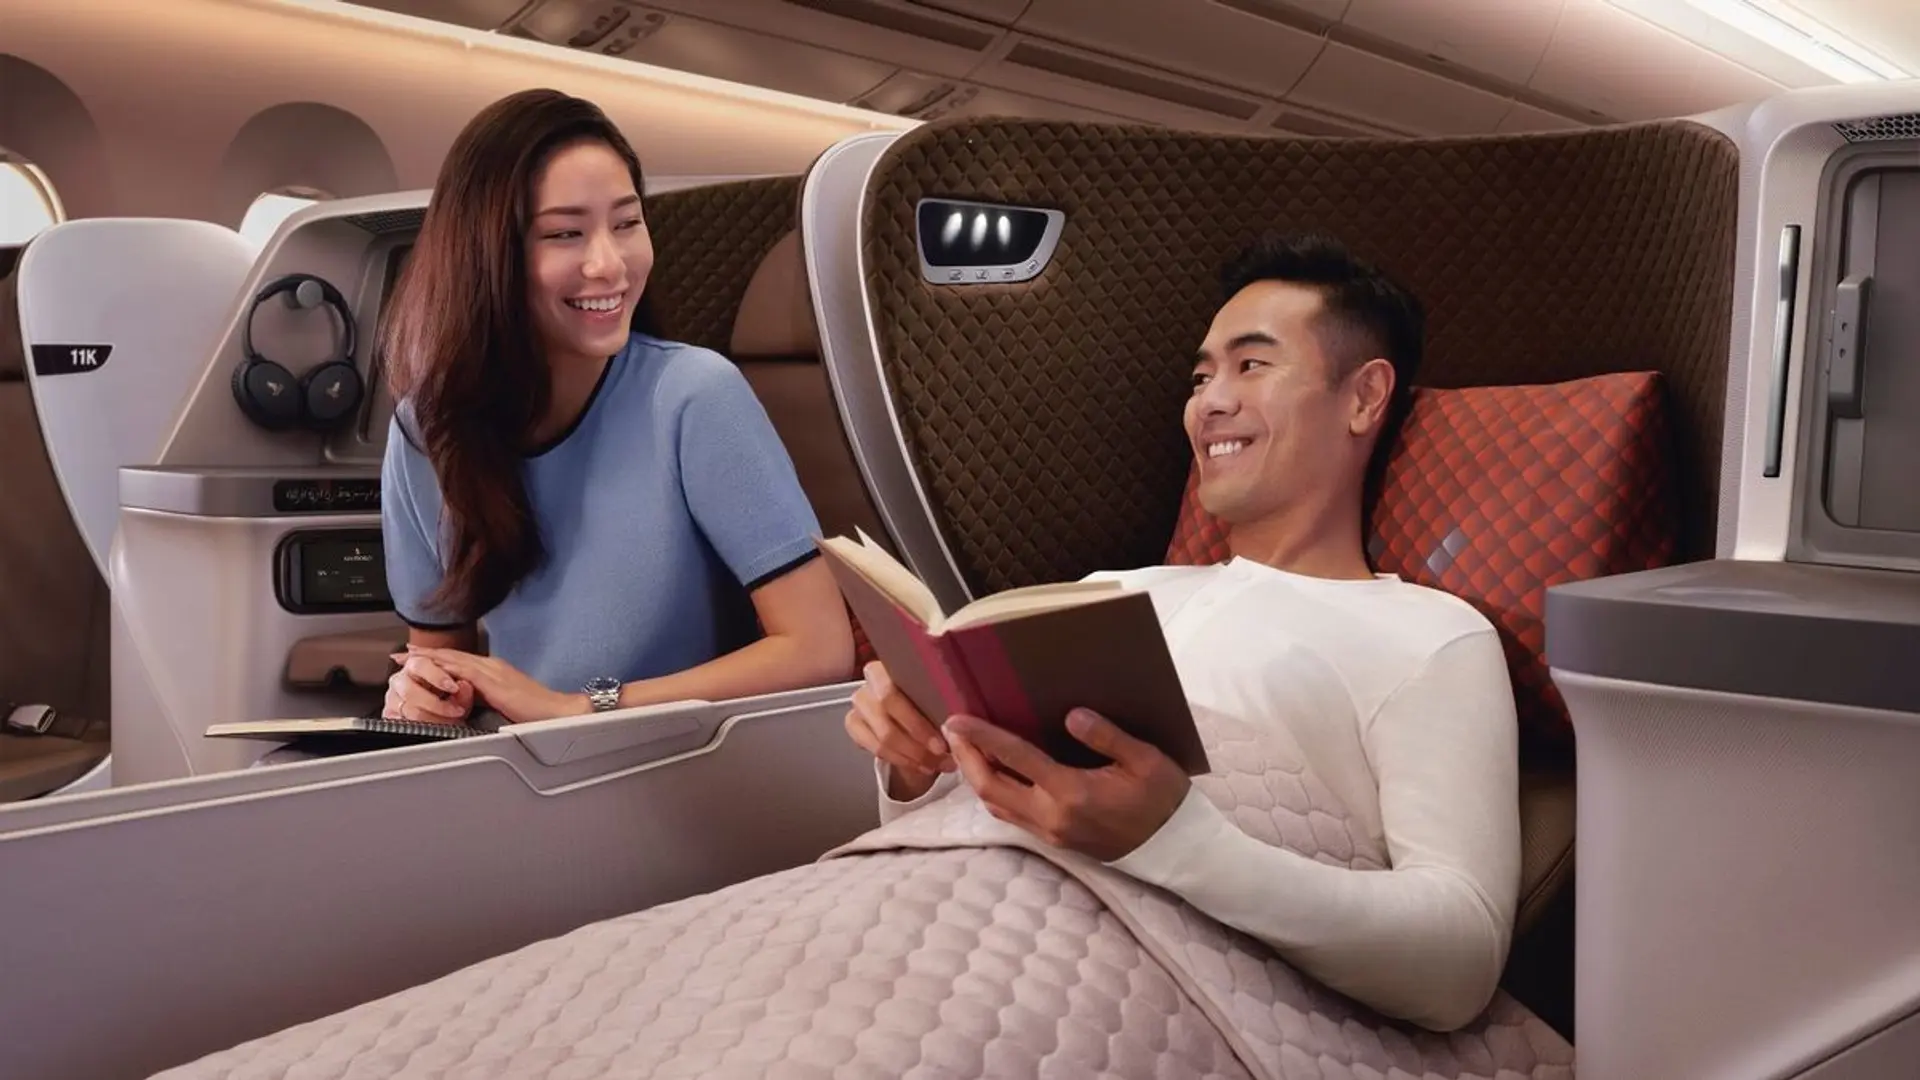 Man laying down on a businessclass flight while reading and smiling at his wife.